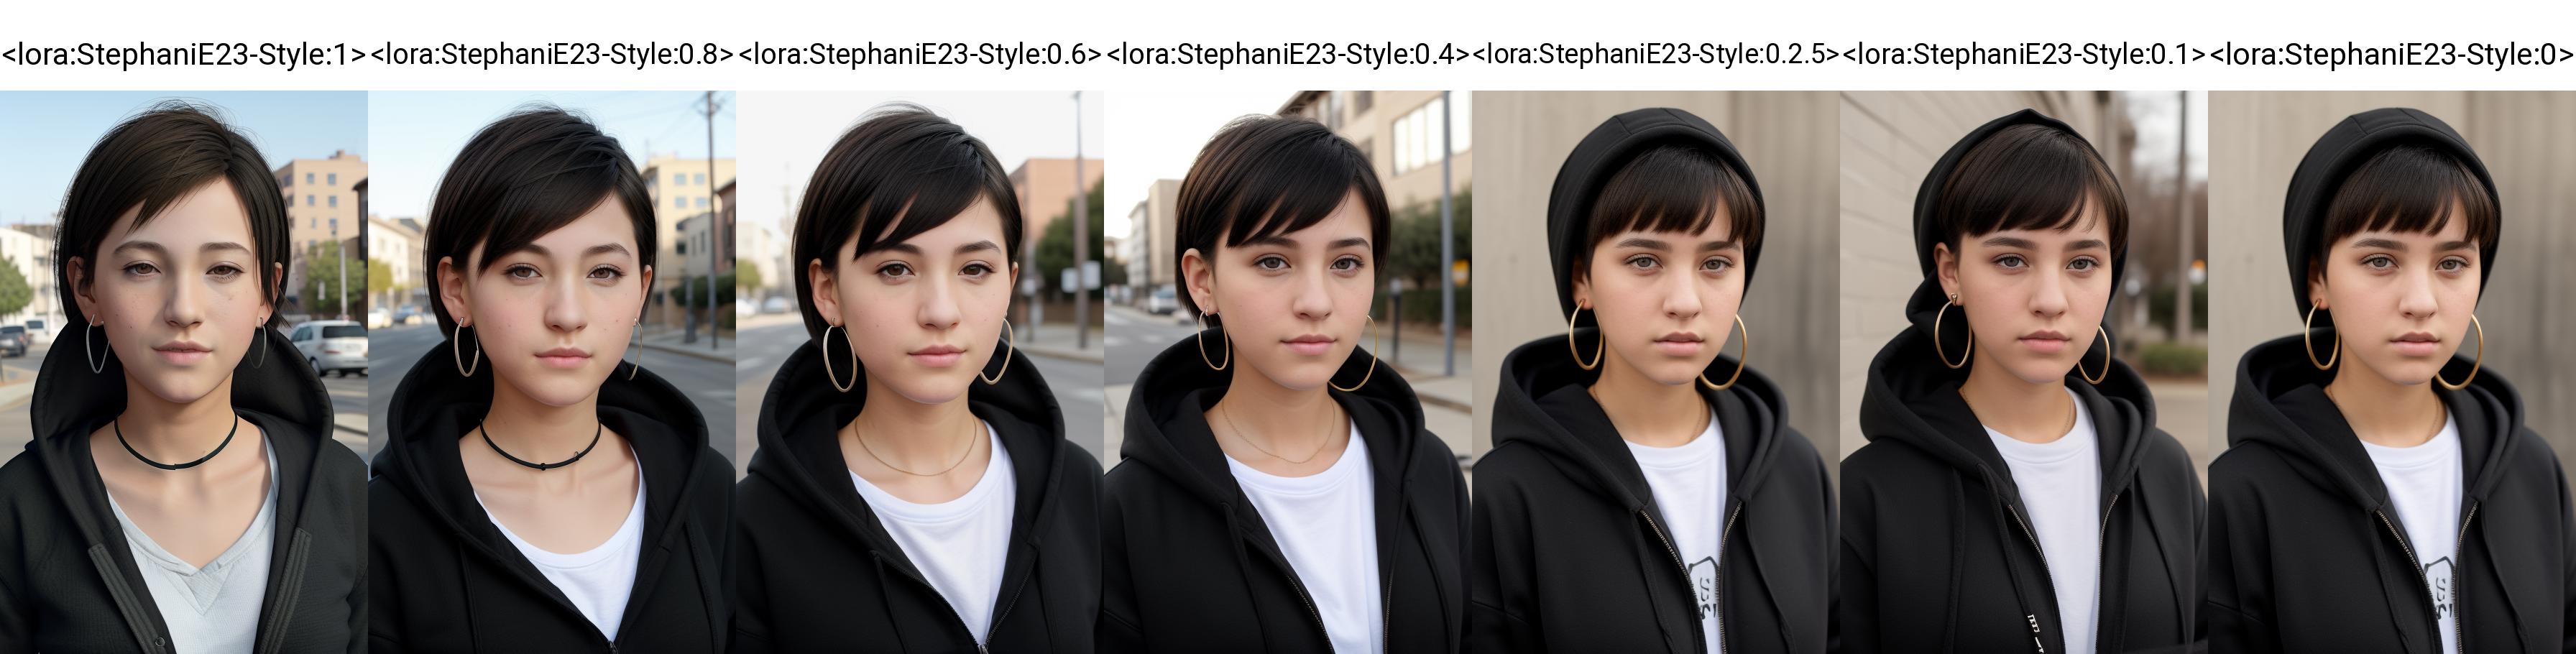 StephaniE23_ Style - SD 1.5 image by AI_Art_Factory